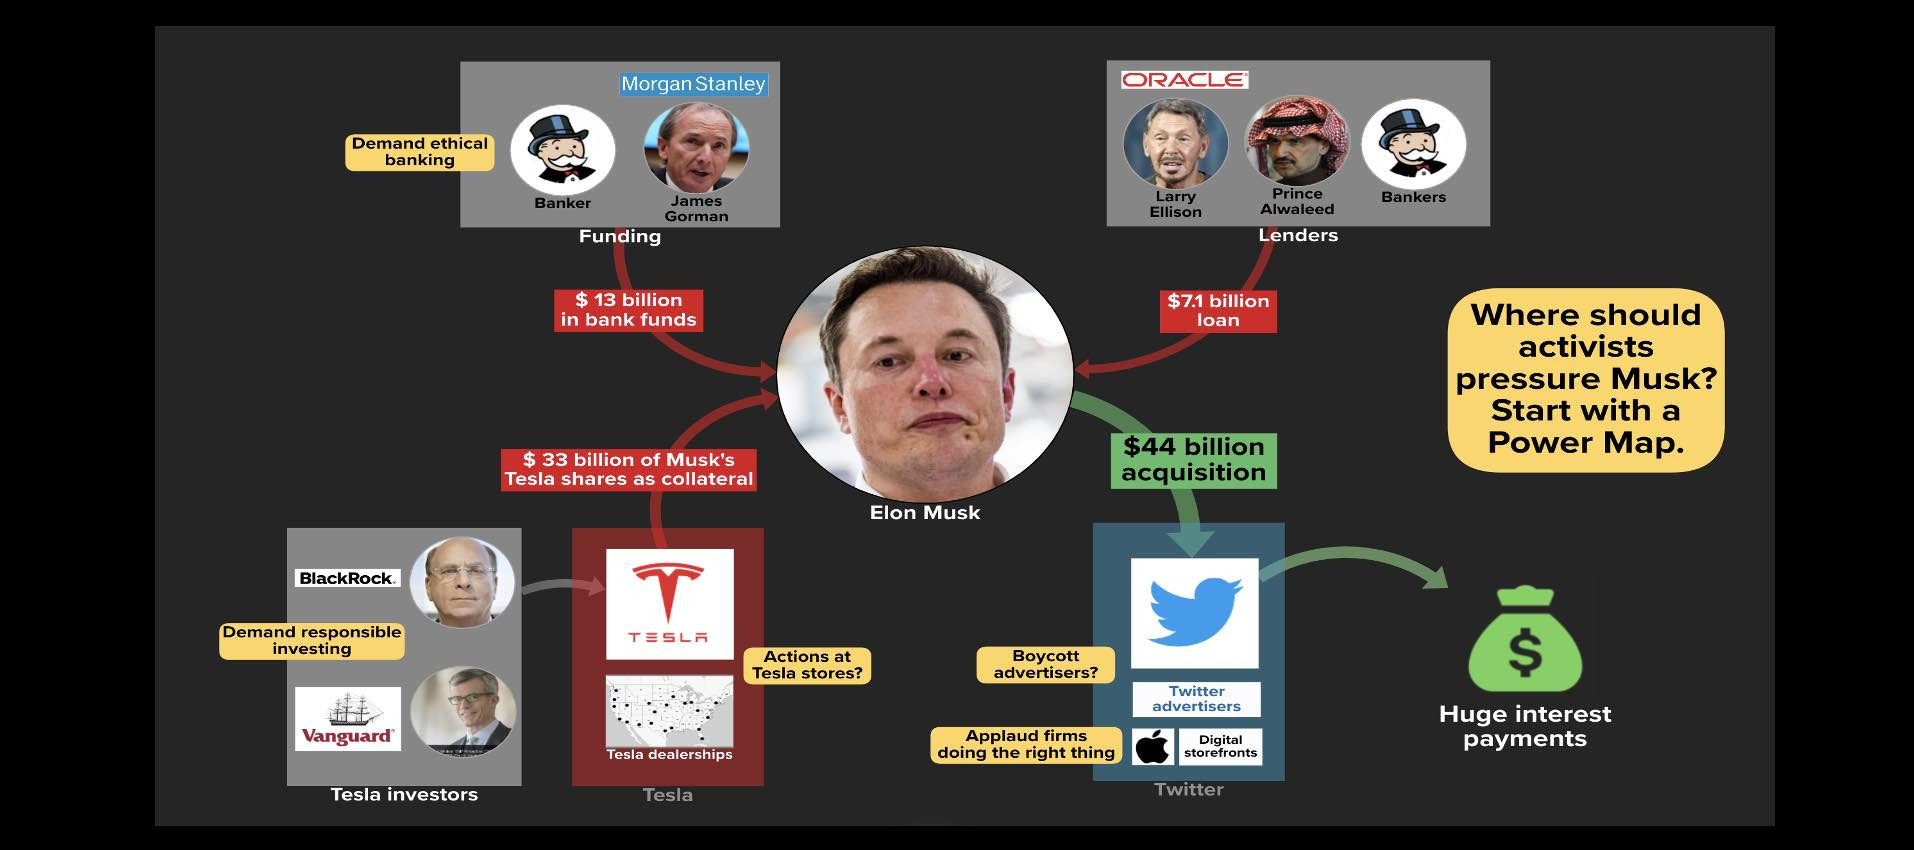 Where should activists pressure Musk? Start with a Power Map.